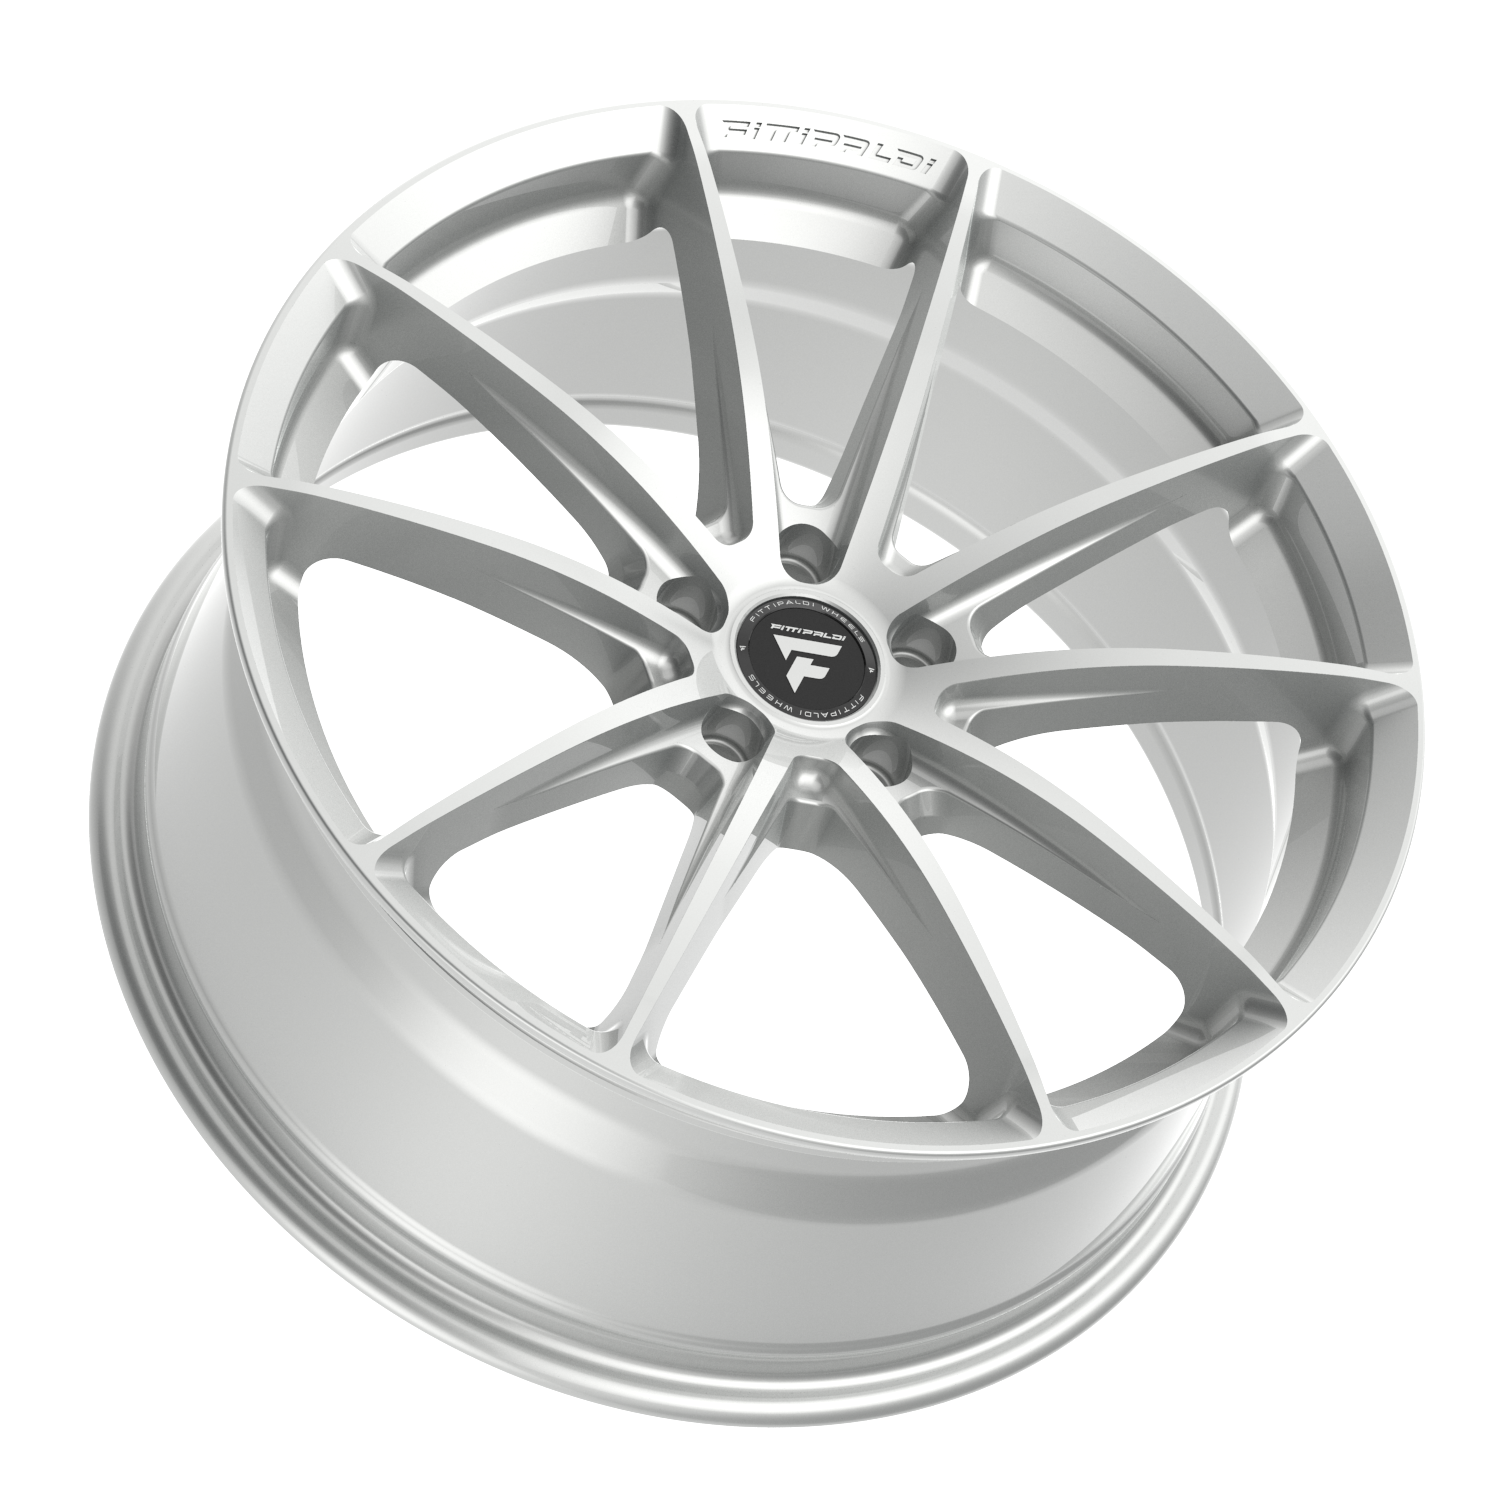 FITTIPALDI 362S 20X8.5 +35 5X112 Brushed Silver